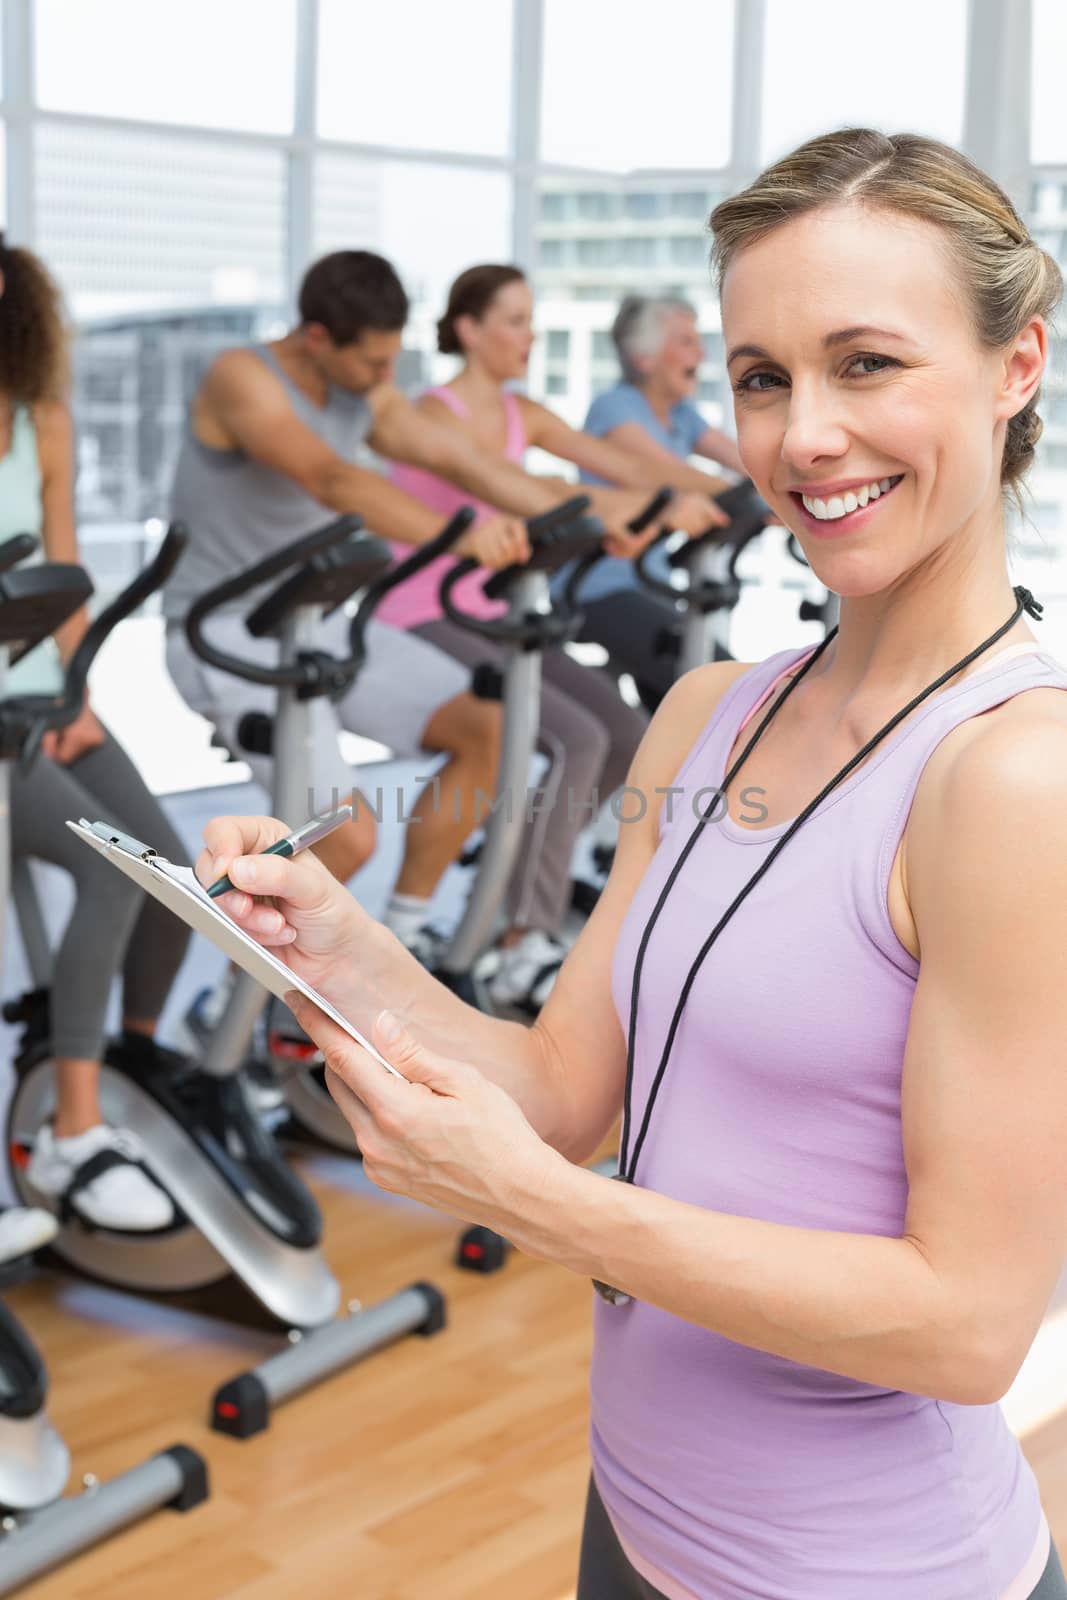 Trainer with people working out at spinning class by Wavebreakmedia